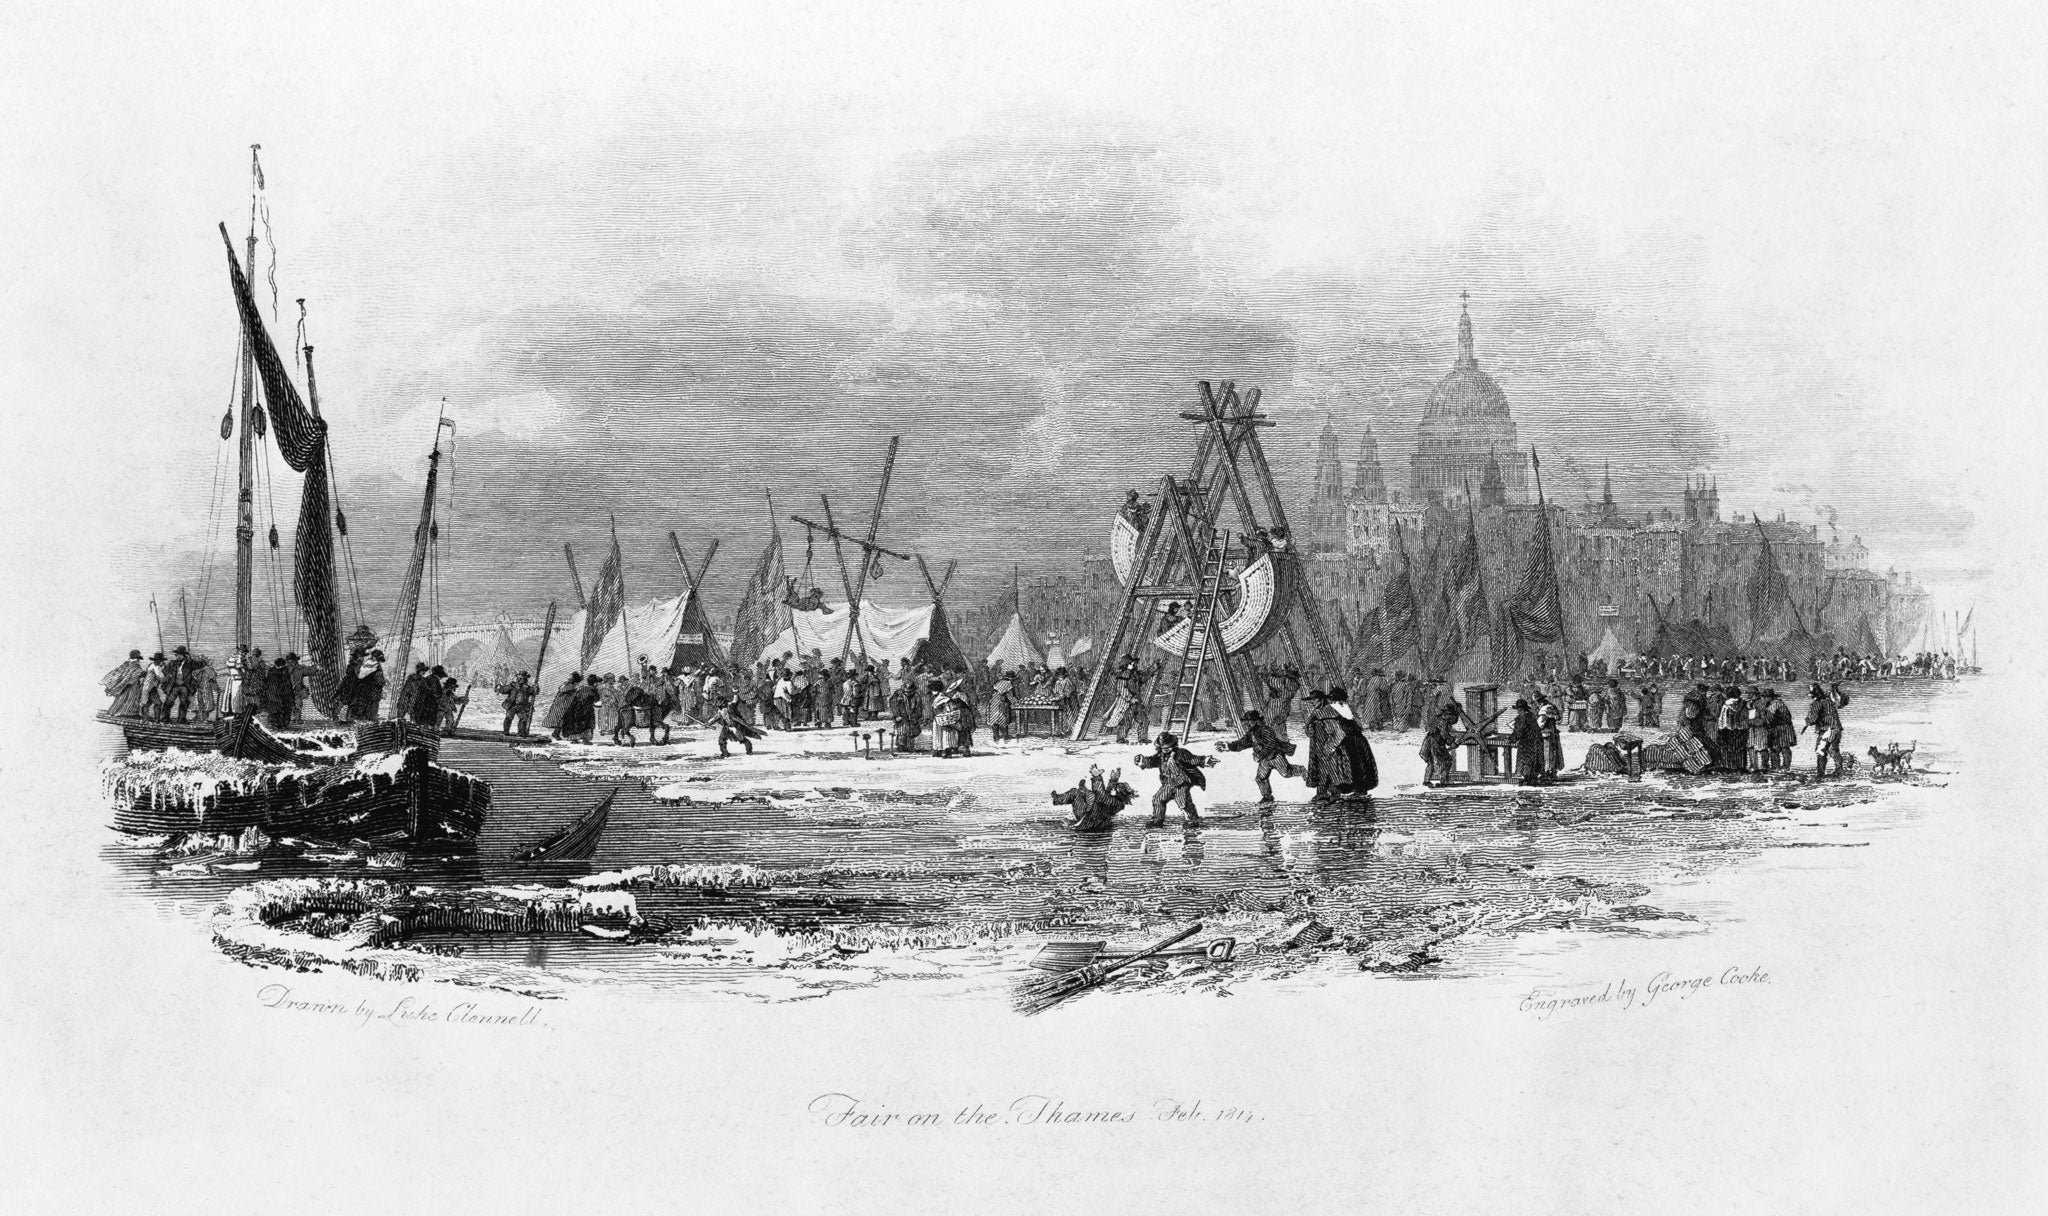 An engraving and etching shows the frost fair on the Thames, with St Paul's Cathedral in the background, in February 1814